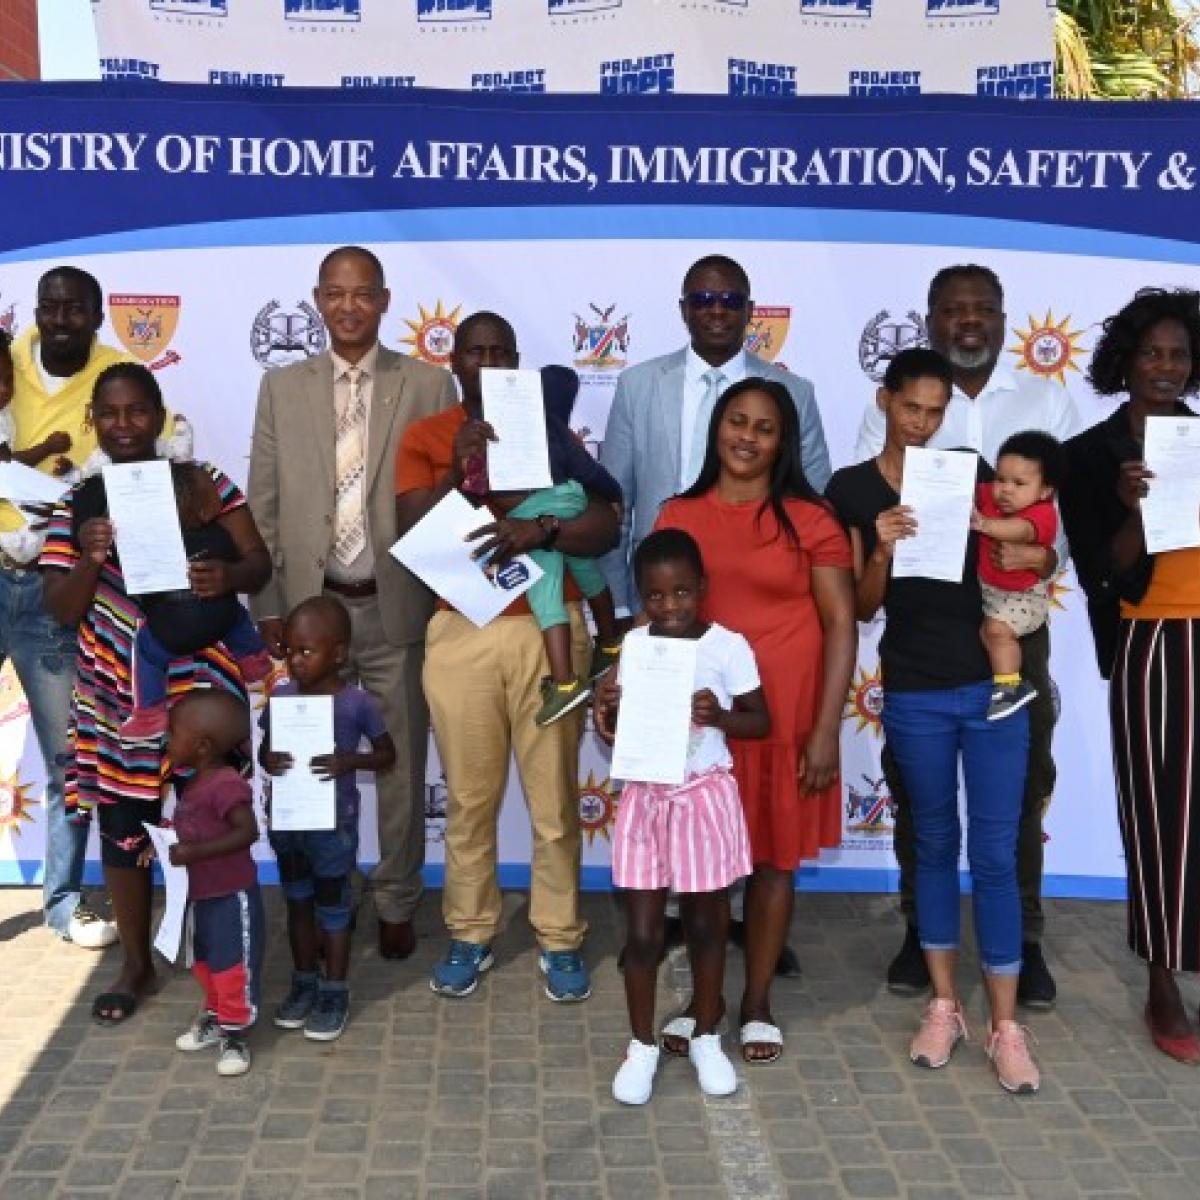 In the background center from left to right: Dr. Abeje Zegeye (HIV Advisor, USAID Namibia), Jackson Wandjva (Deputy Executive Director of the Ministry of Home Affairs, Immigration, Safety and Security) and Nanyemba Katamba (Deputy Chief of Party NARP, Project Hope Namibia) with children who received their birth certificate.